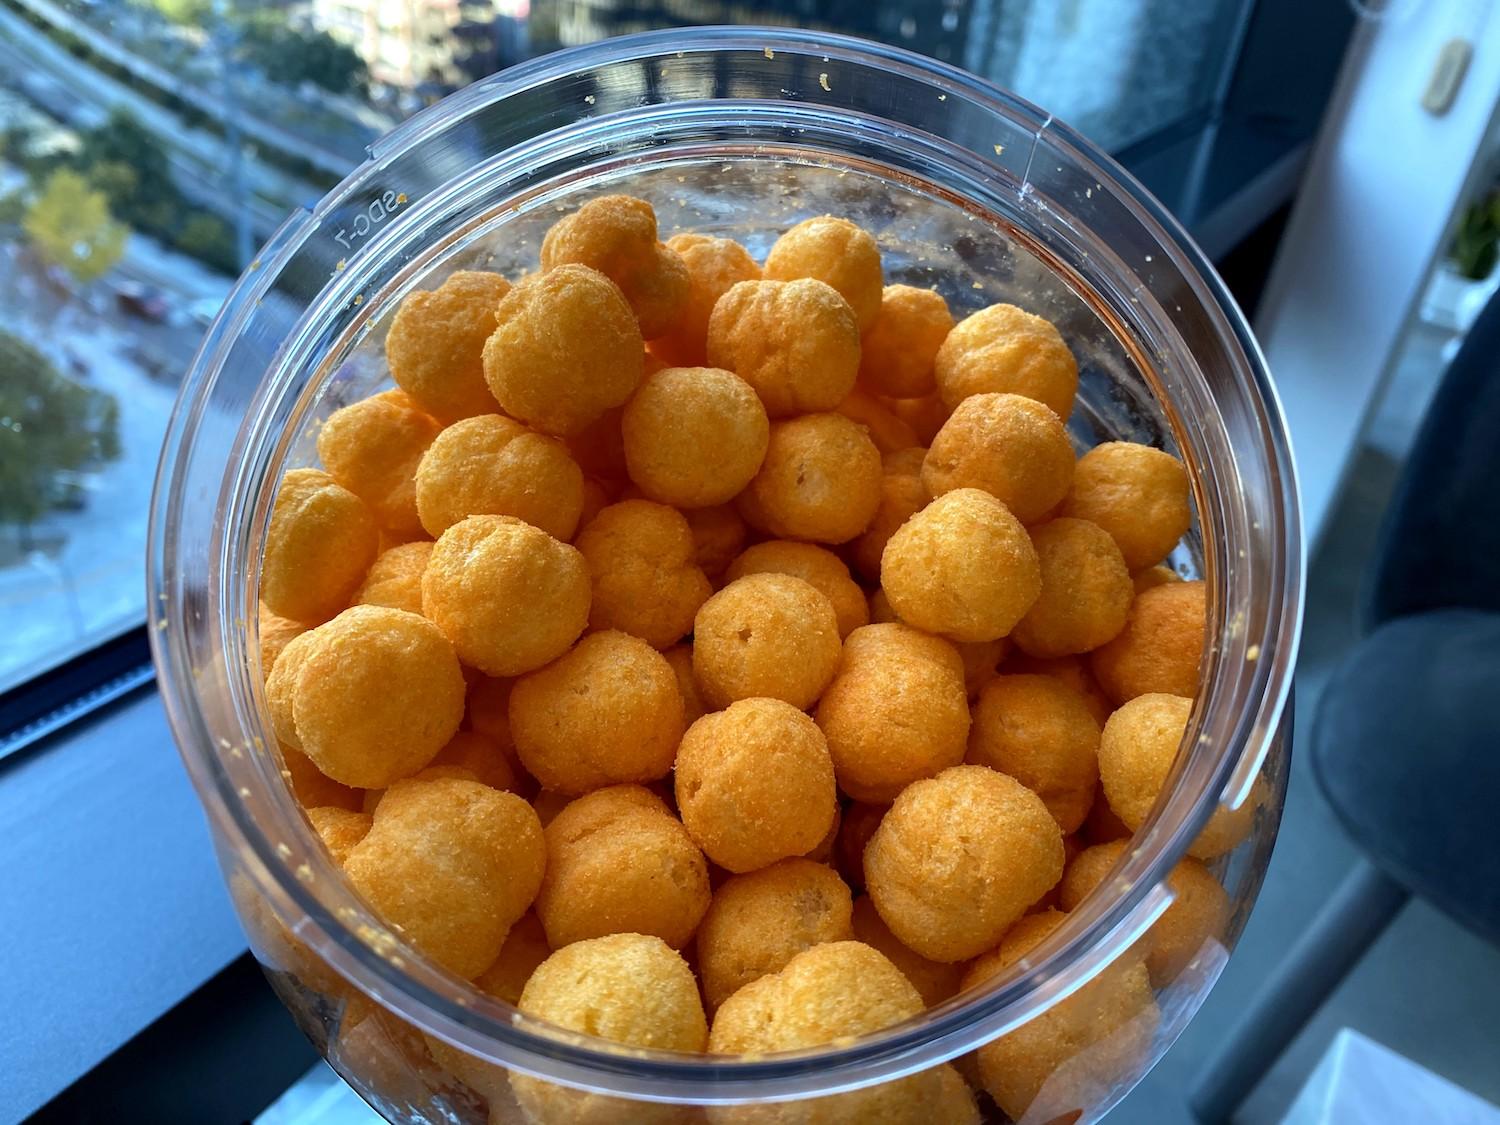 open jar of korean brand no brand's cheddar cheese ball snack